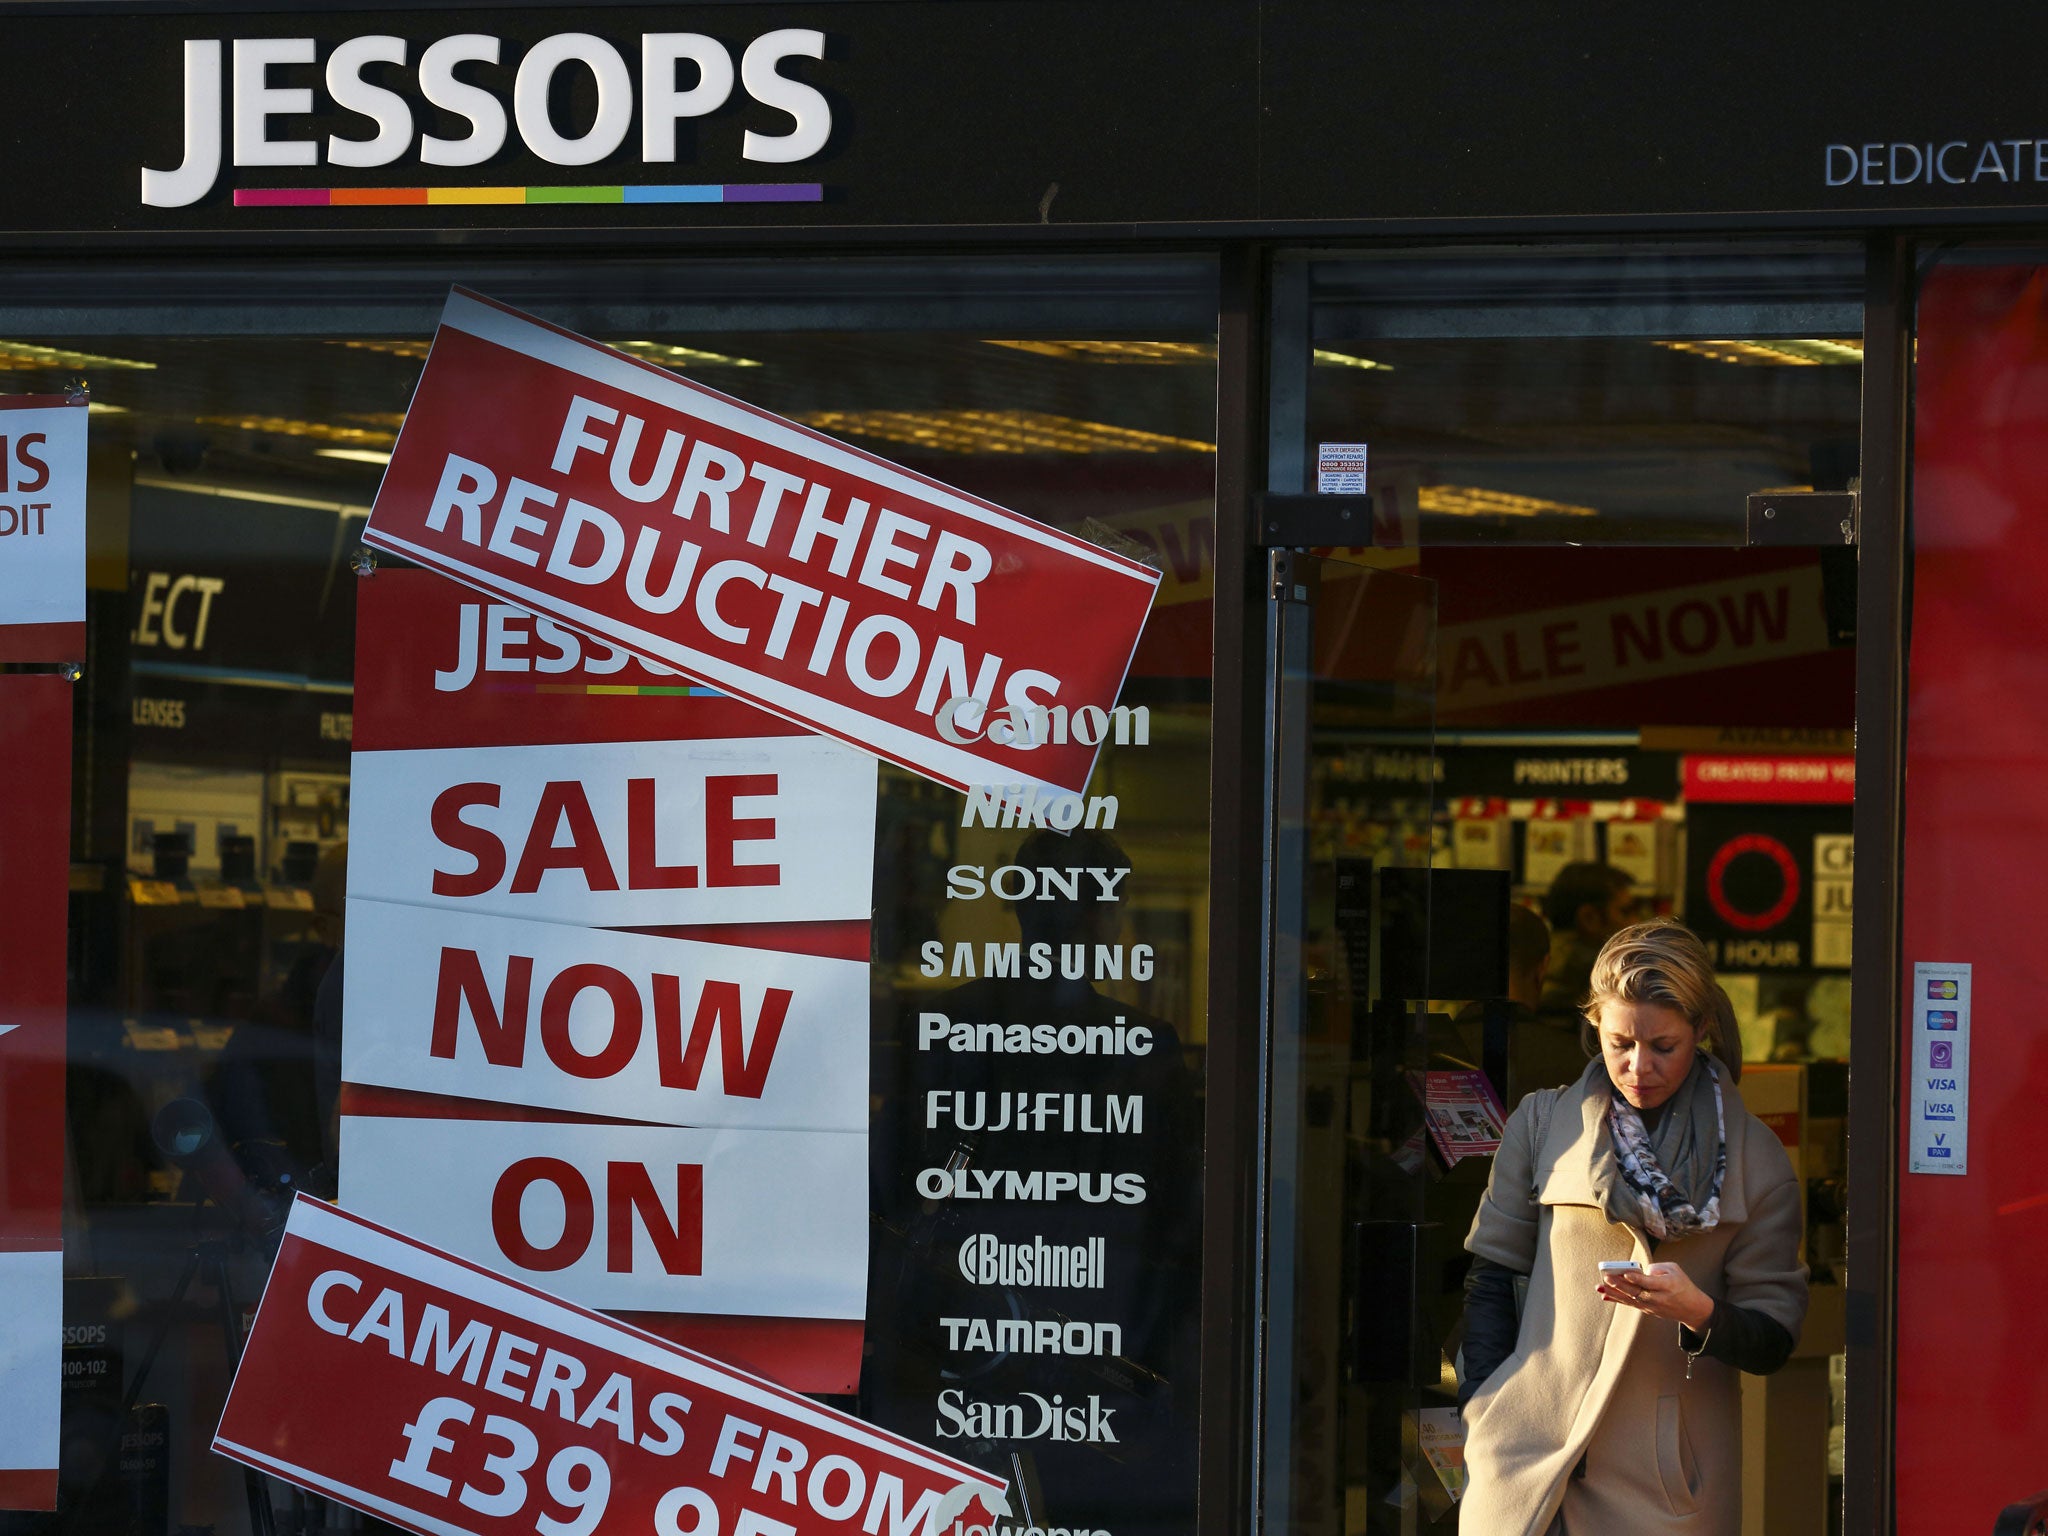 A woman leaves a branch of Jessops camera shop in Central London on January 9, 2013. British photographic chain Jessops went into adminstration on January 9, 2013, putting some 2,000 jobs at risk.